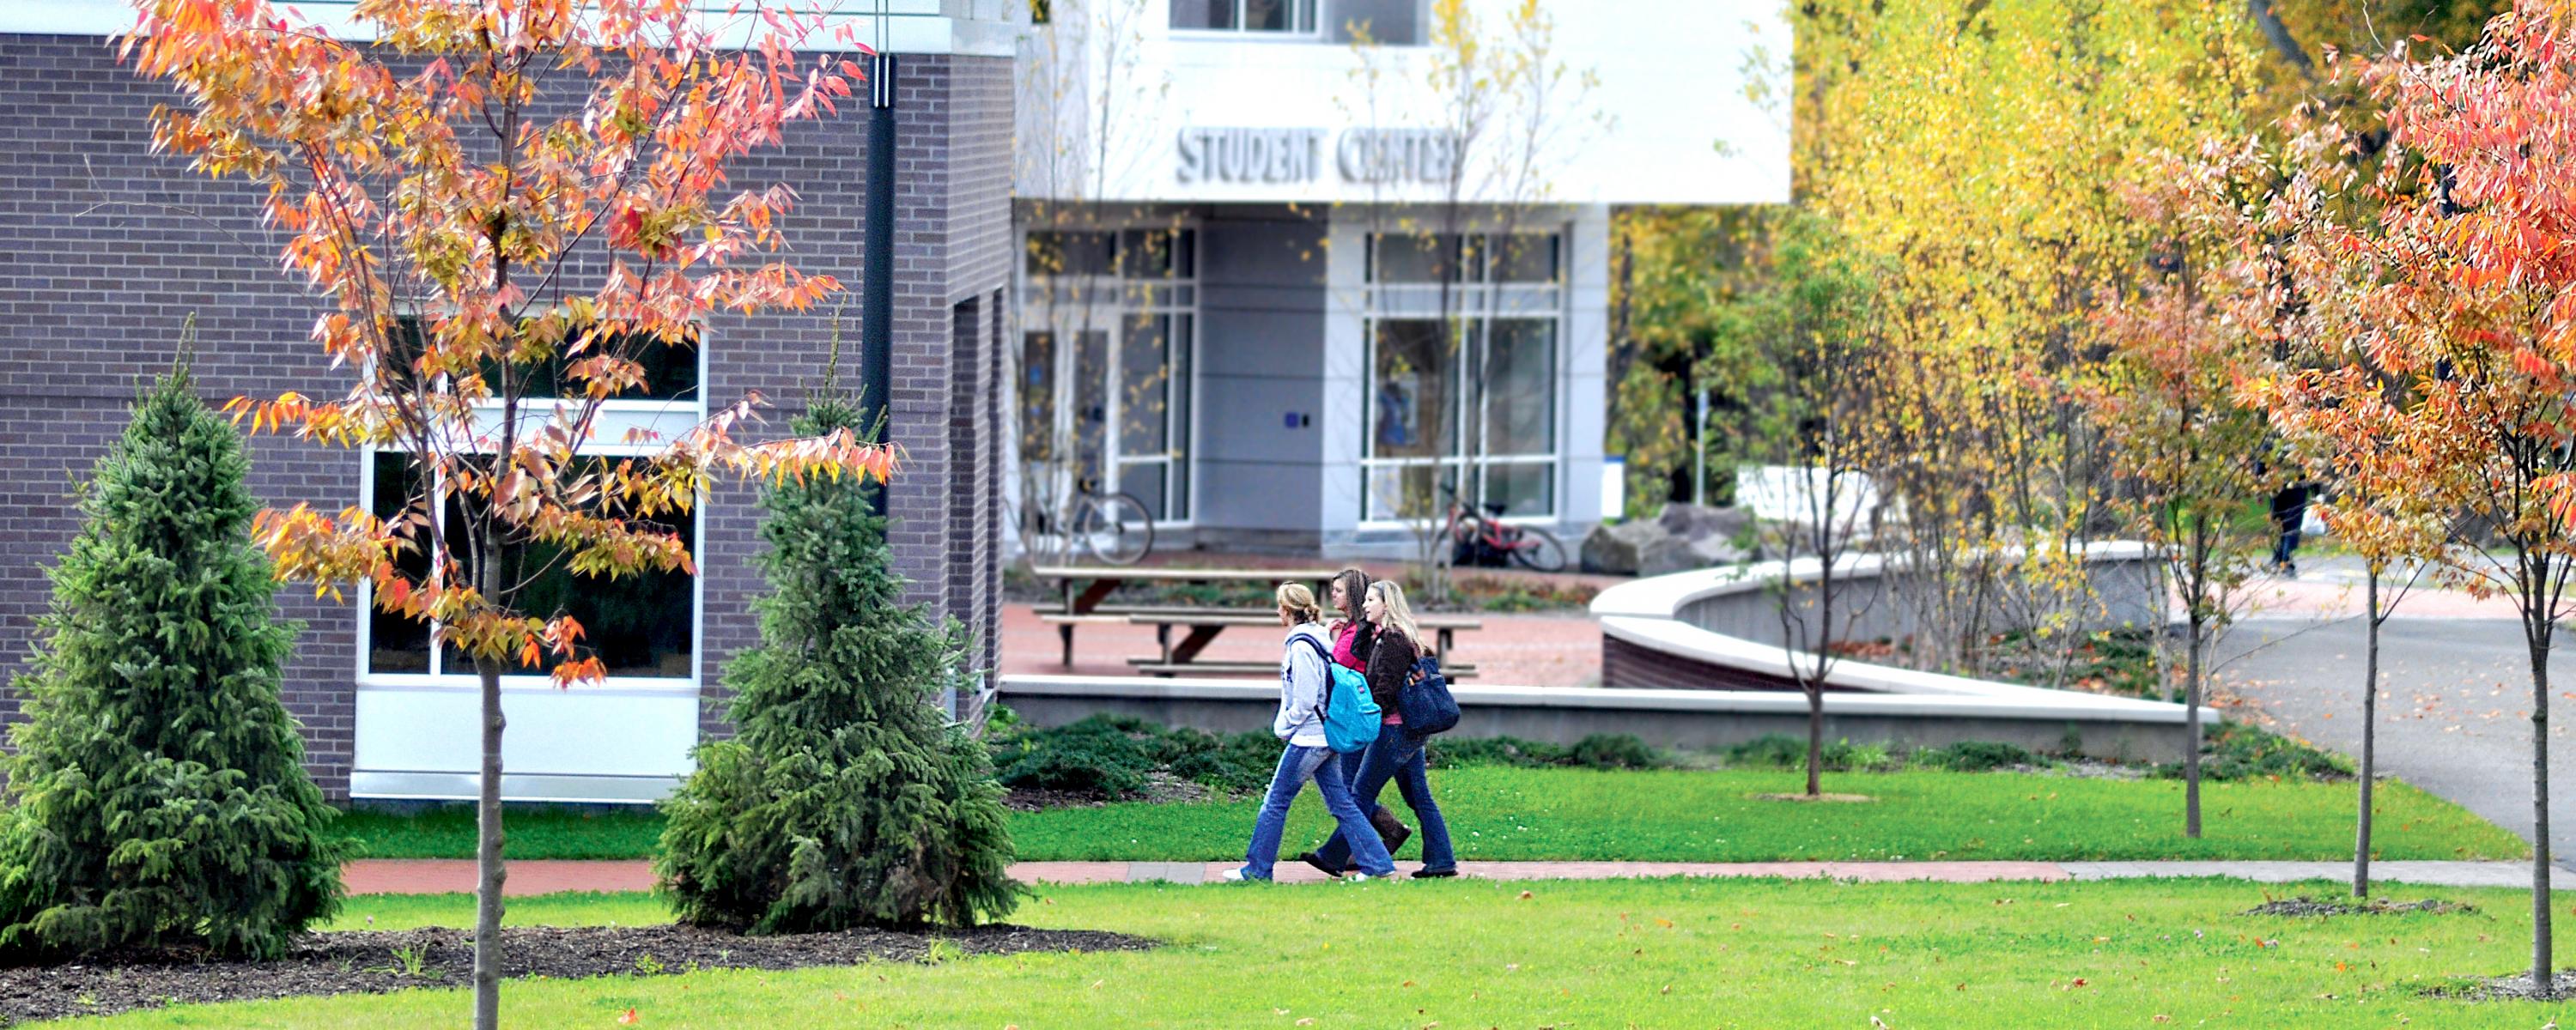 Students walk into Student Center on Utica campus